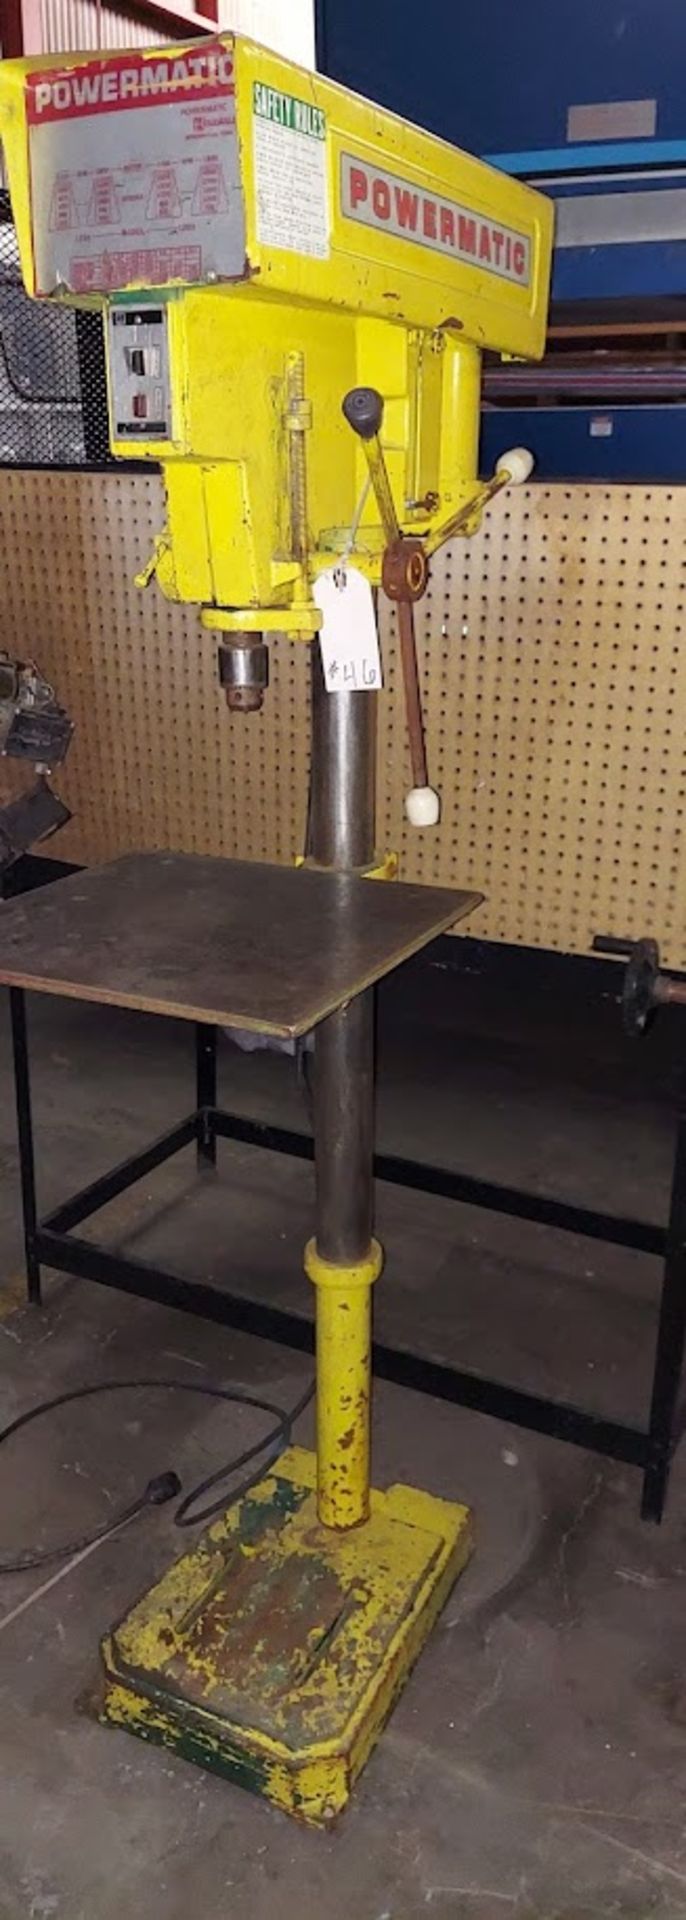 Powermatic 15" Drill Press, Model #115A, Variable Speed Step Pulley, Motor is 3/4 HP 115/208-230